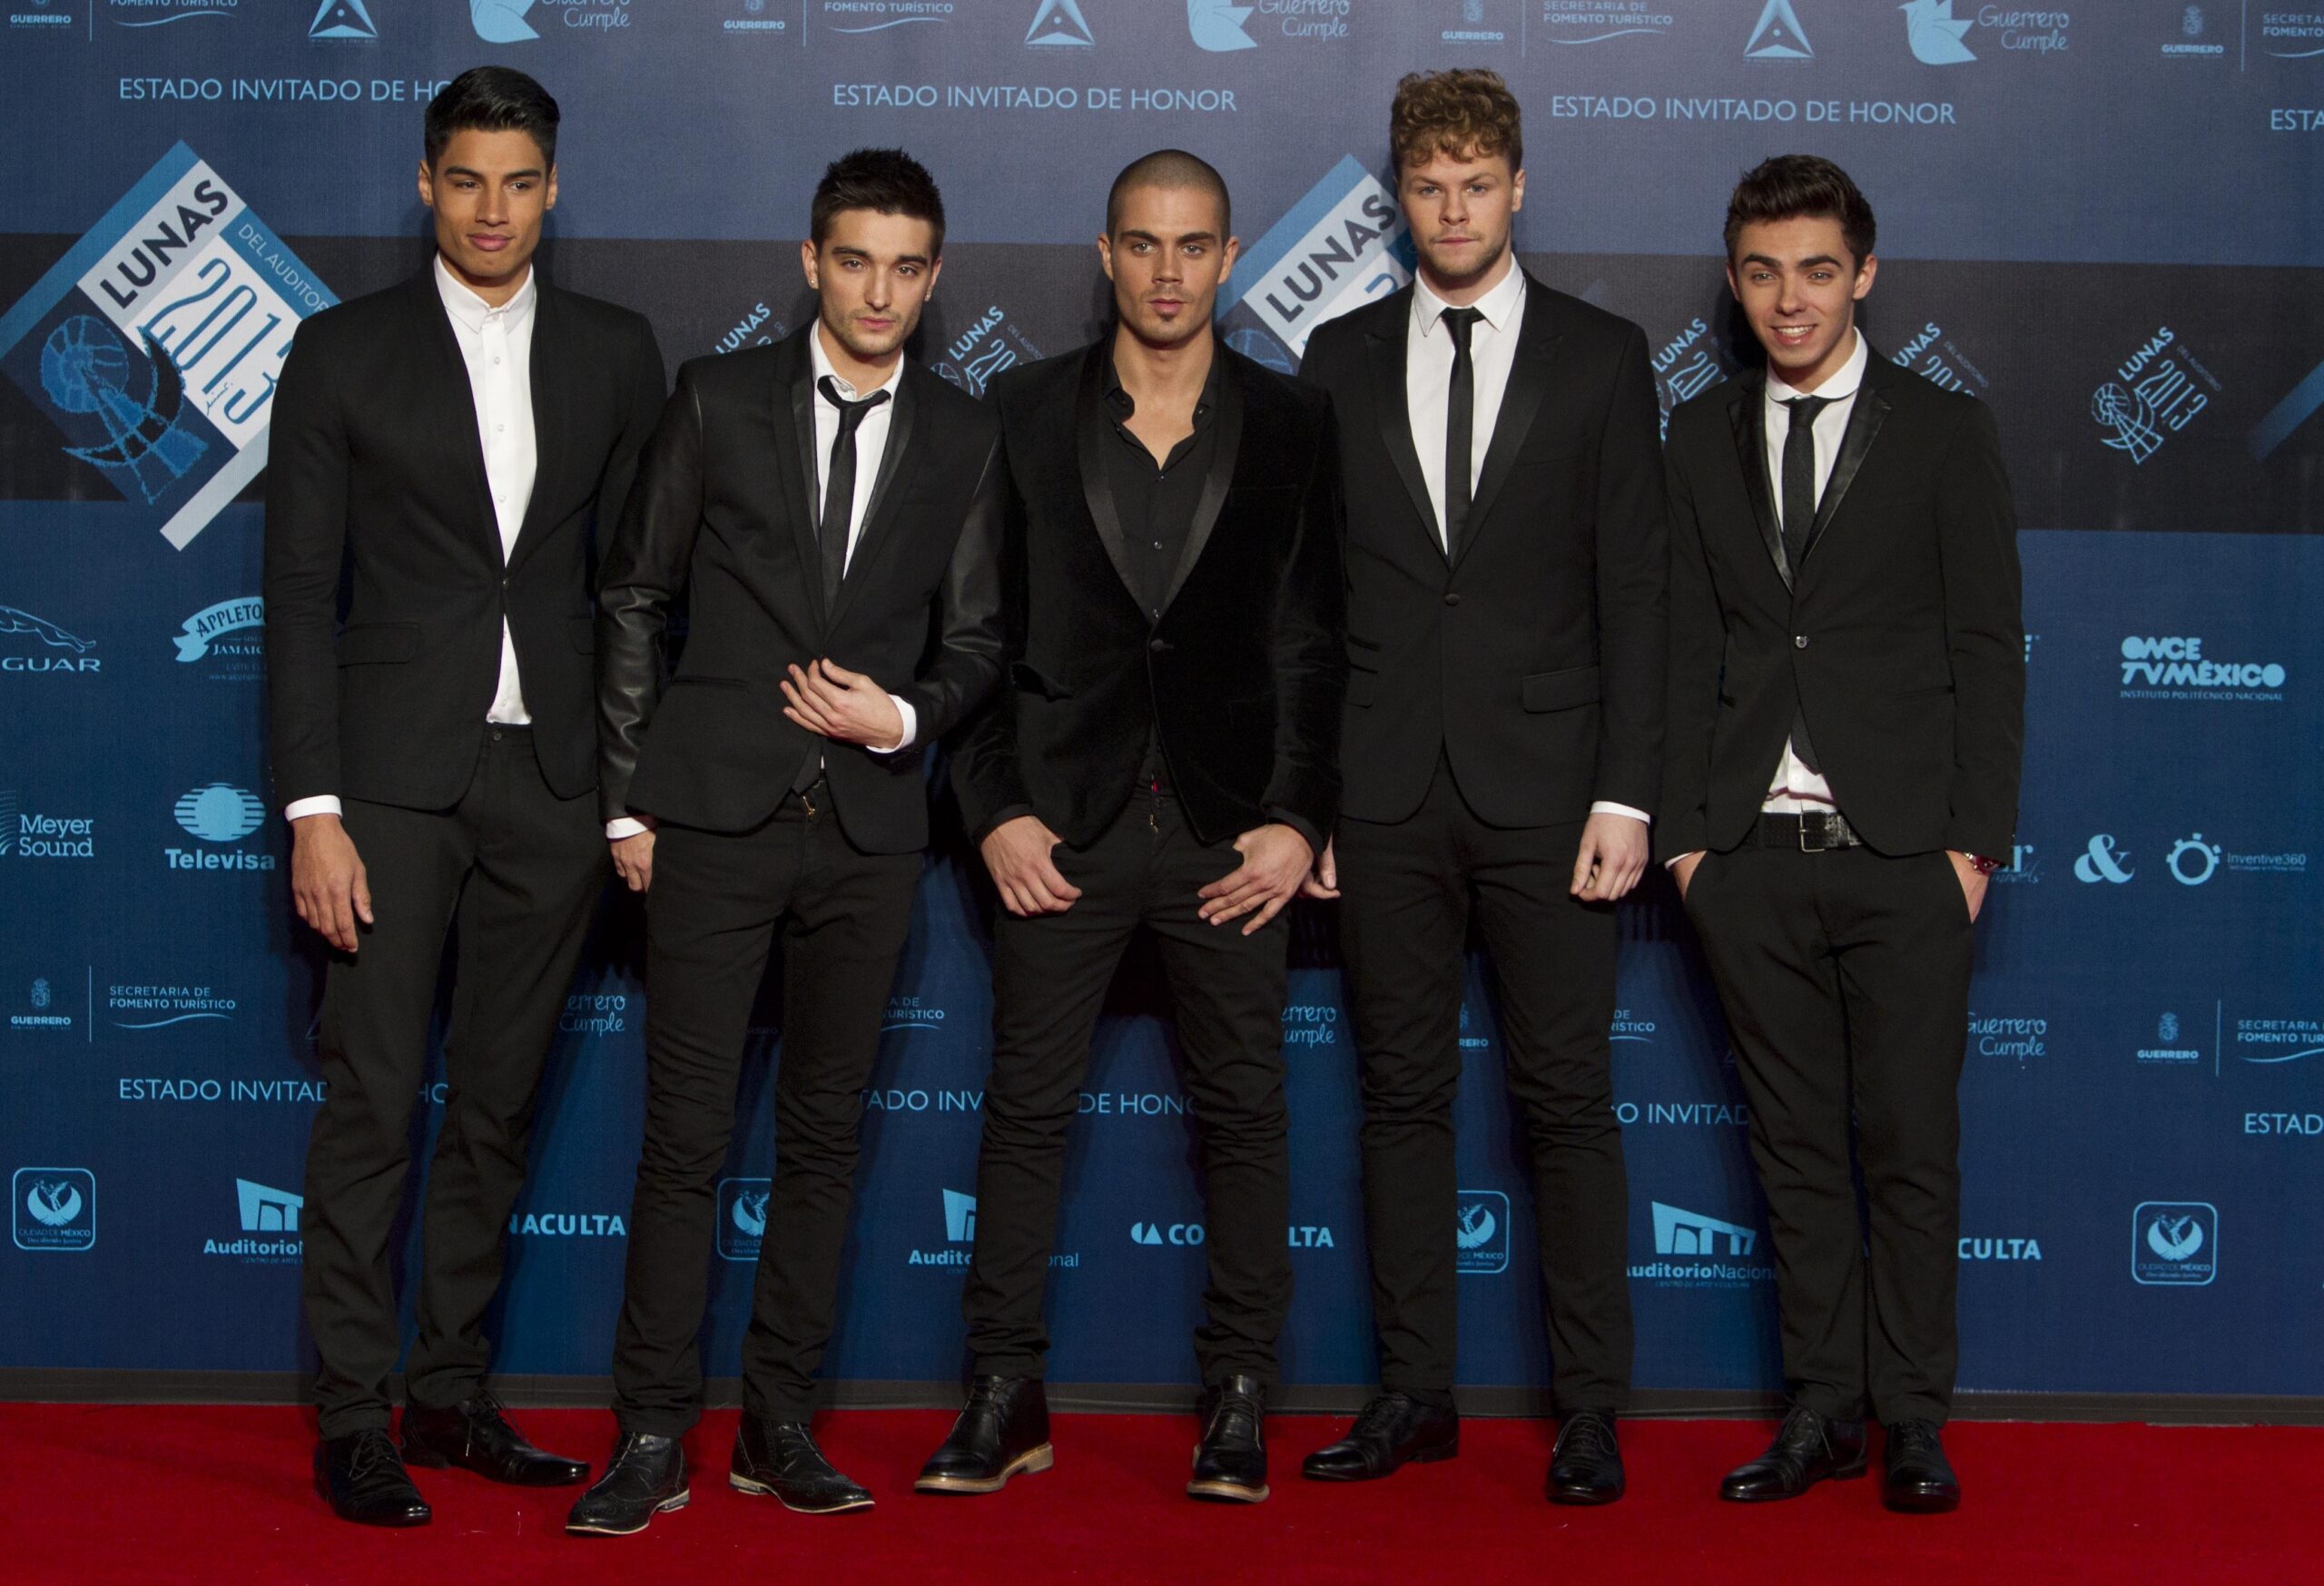 FILE - Pop band The Wanted pose on the red carpet before the Lunas del Auditorio award ceremony in Mexico City, Oct. 30, 2013. From right: Nathan Sykes, Jay McGuiness, Max George, Tom Parker and Siva Kaneswaran. Tom Parker, a member of British-Irish boy band The Wanted, has died after being diagnosed with an inoperable brain tumor. He was 33. The band announced that Parker died Wednesday, March 30, 2022, “surrounded by his family and his band mates.” (AP Photo/Christian Palma, file)